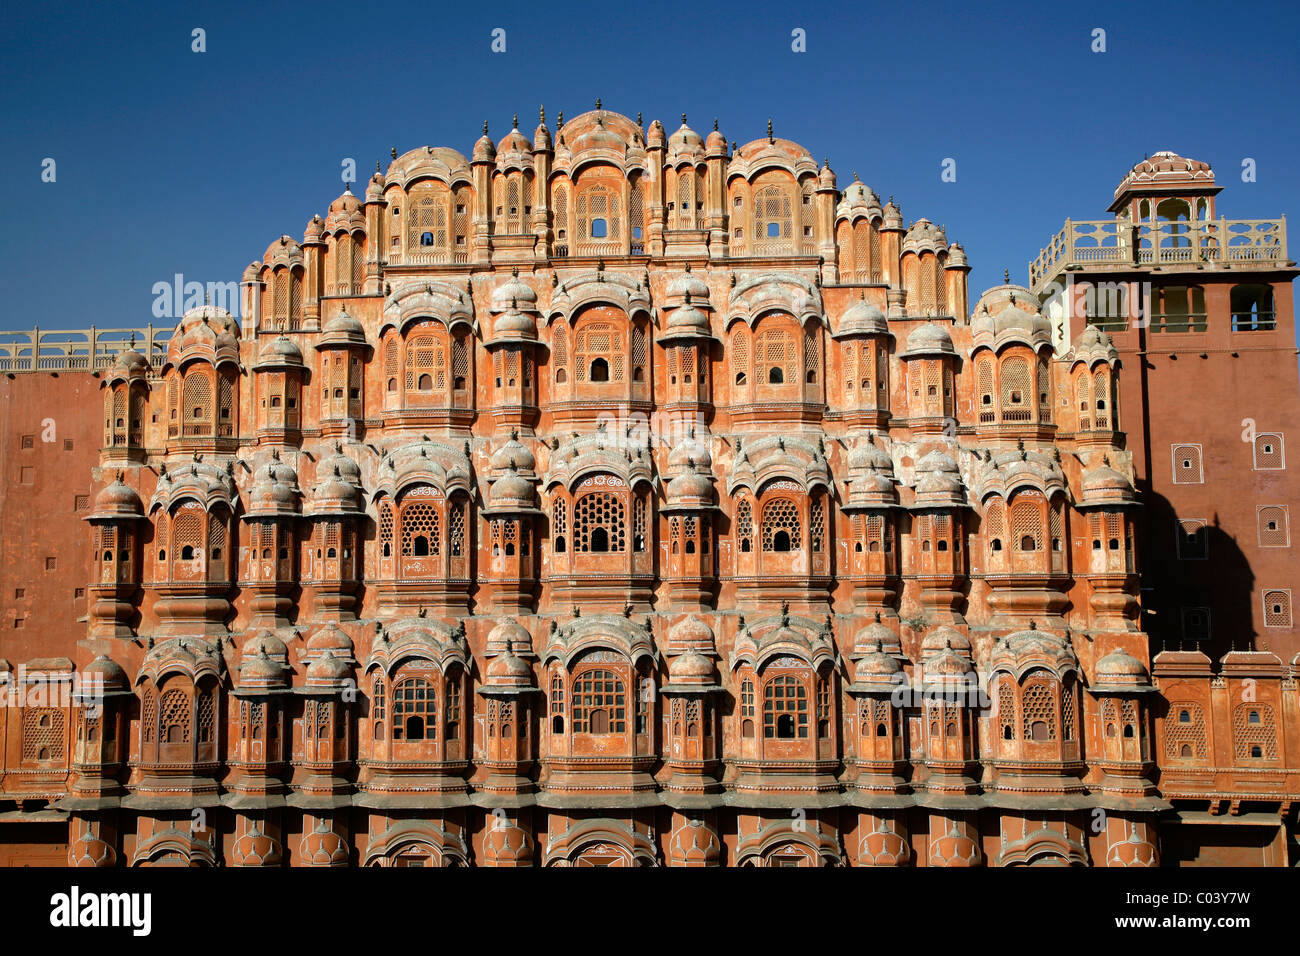 Palace of the India, Rajasthan, Jaipur, palace of the winds Stock Photo